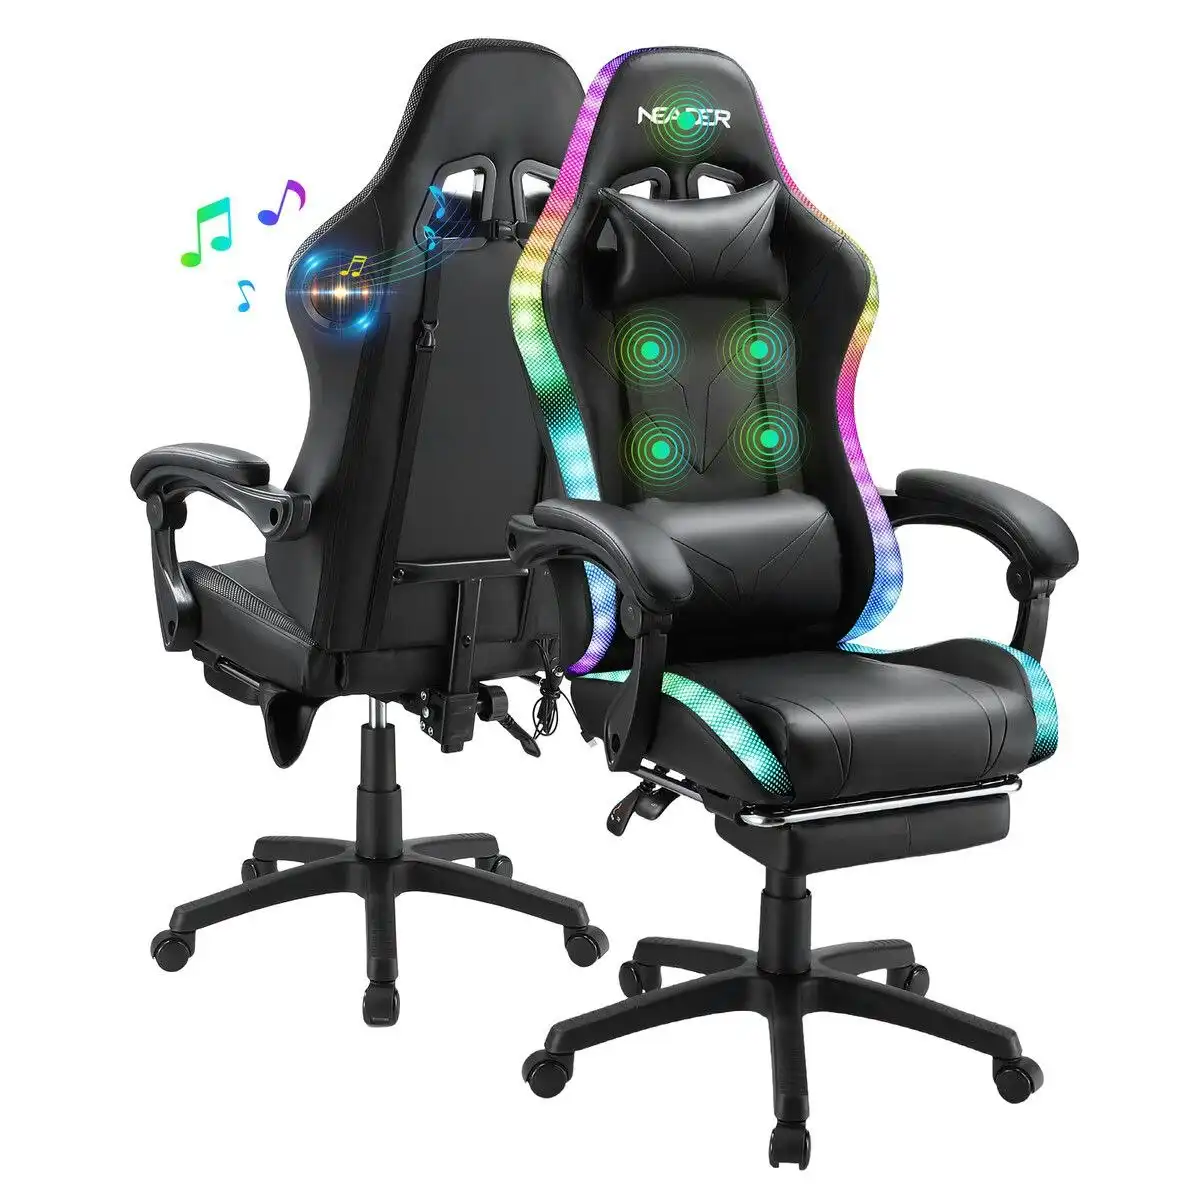 Neader Gaming Office Chair RGB LED Racing Massage PU Computer Seat Bluetooth Speaker Headrest Retractable Footrest Comfortable Armchair Recliner Black